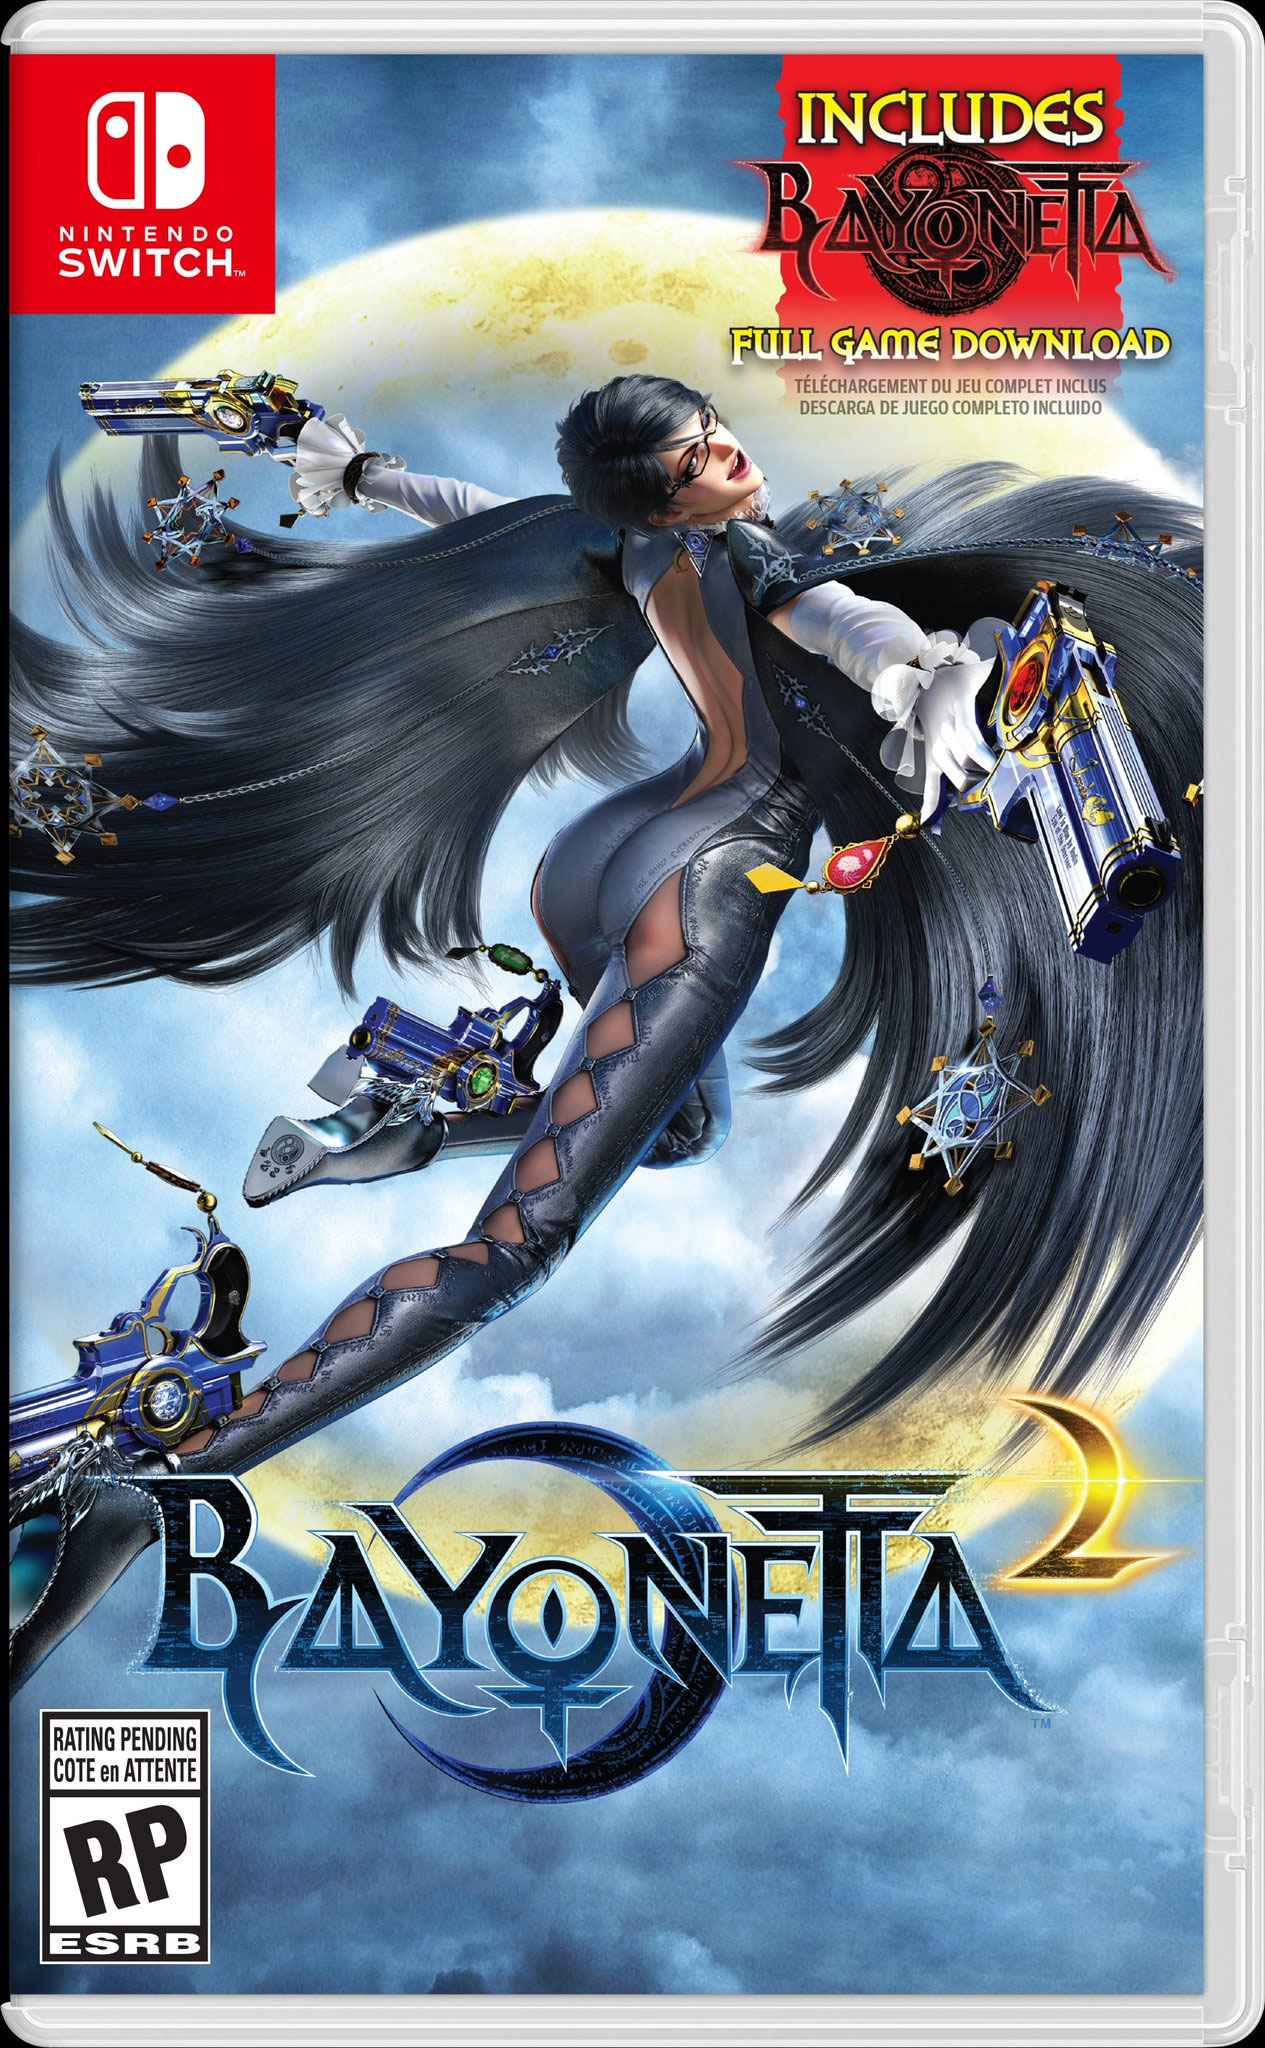 Bayonetta 1 And 2 Are Coming To The Nintendo Switch